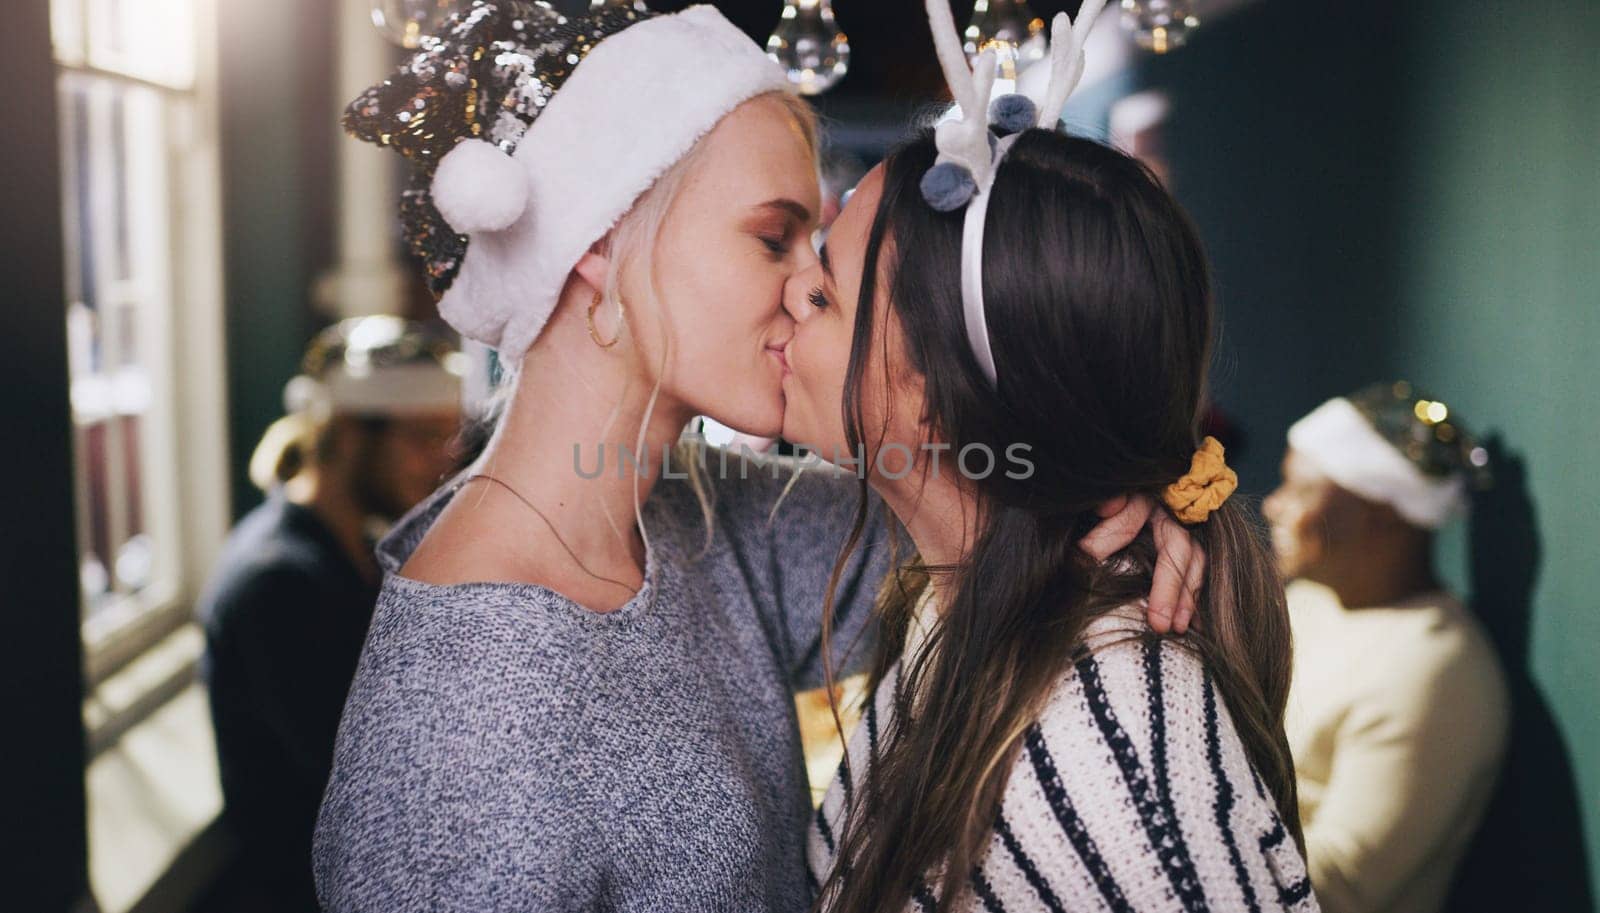 Christmas, kiss and love with lesbian couple at party for celebration, festive and holiday. Lgbtq, gay and dance with women partners at xmas event for romance, social and relax at reunion gathering.